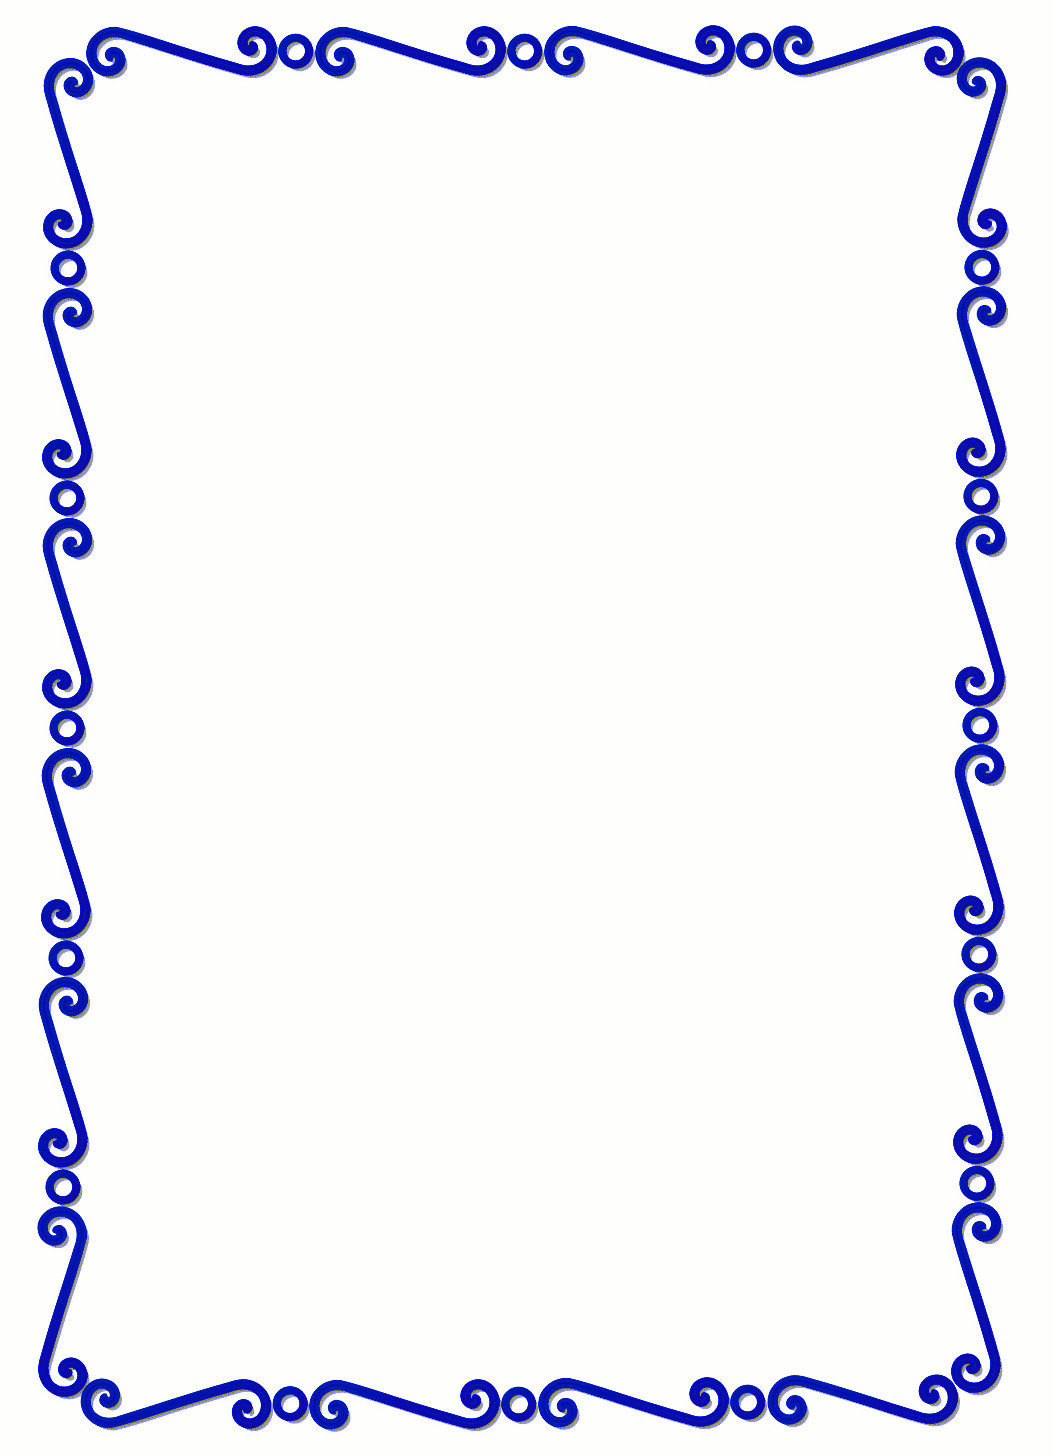 Clip Art Border For Microsoft Word Clipart - Clipart Suggest In Word Border Templates Free Download